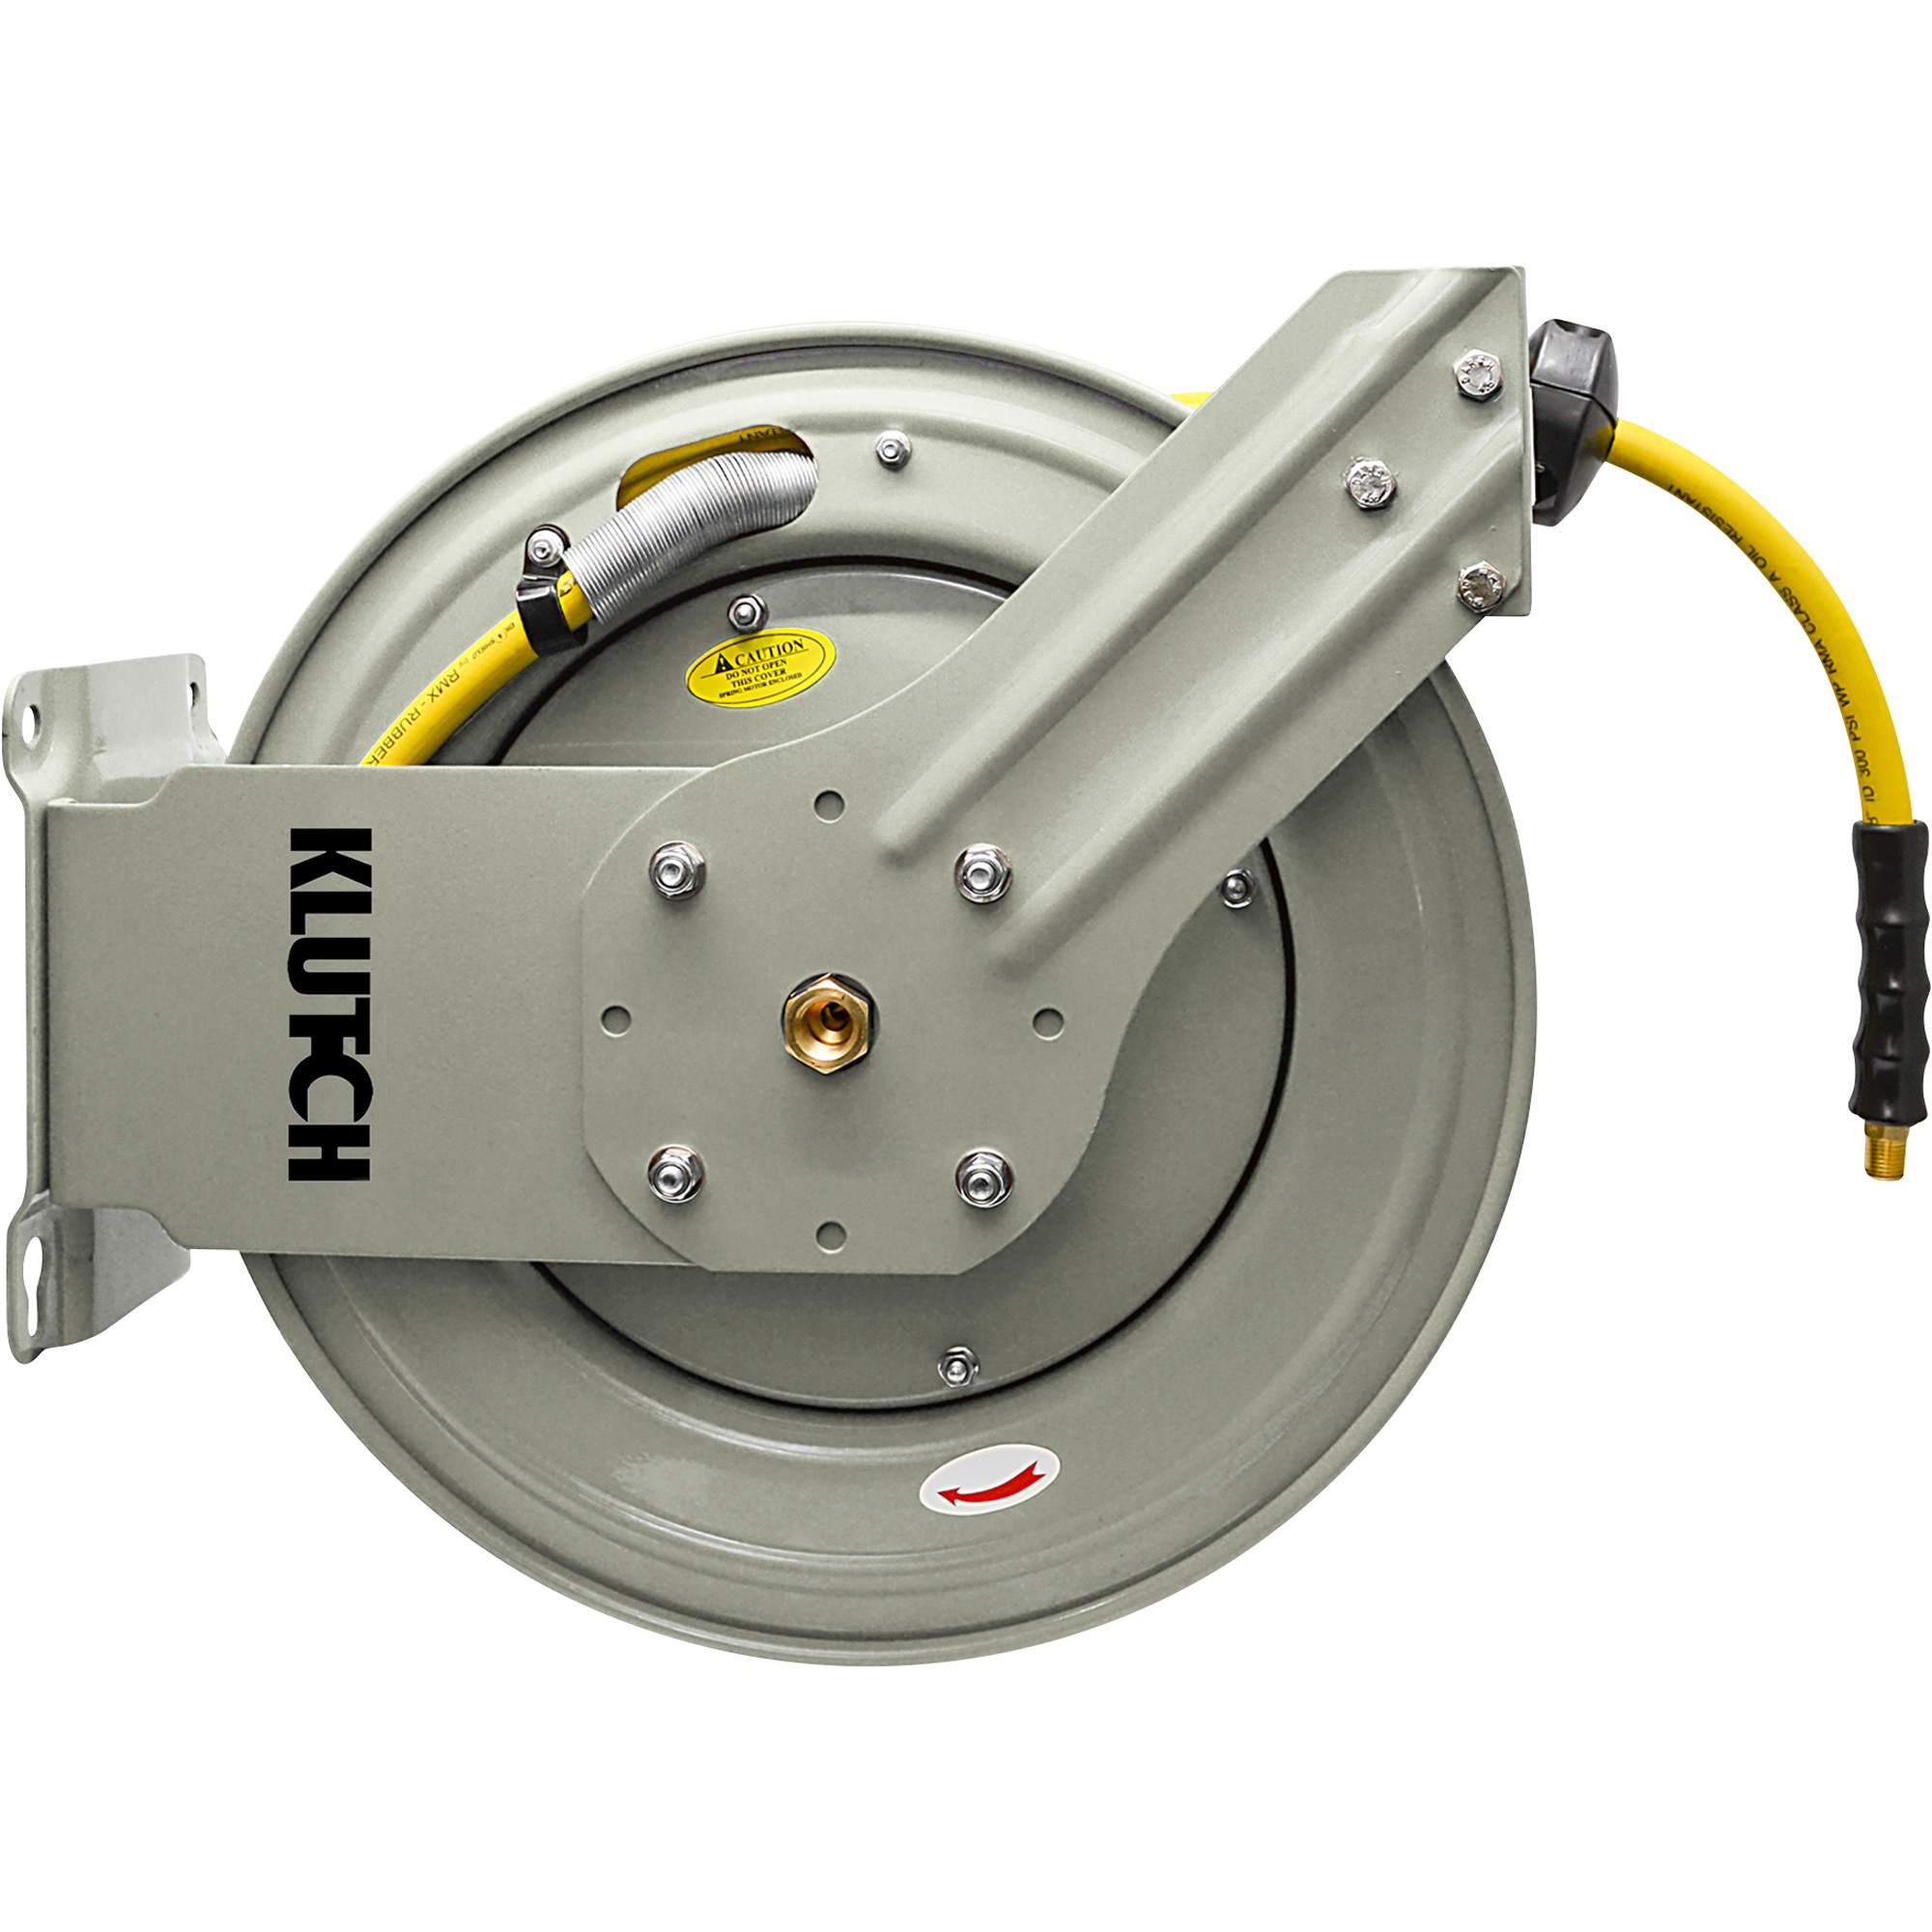 Klutch Auto-Rewind Air Hose Reel, with 1/2in.. x 50ft. Oil-Resistant Rubber  Hose, 300 PSI, Model# OSRDA1250-NT